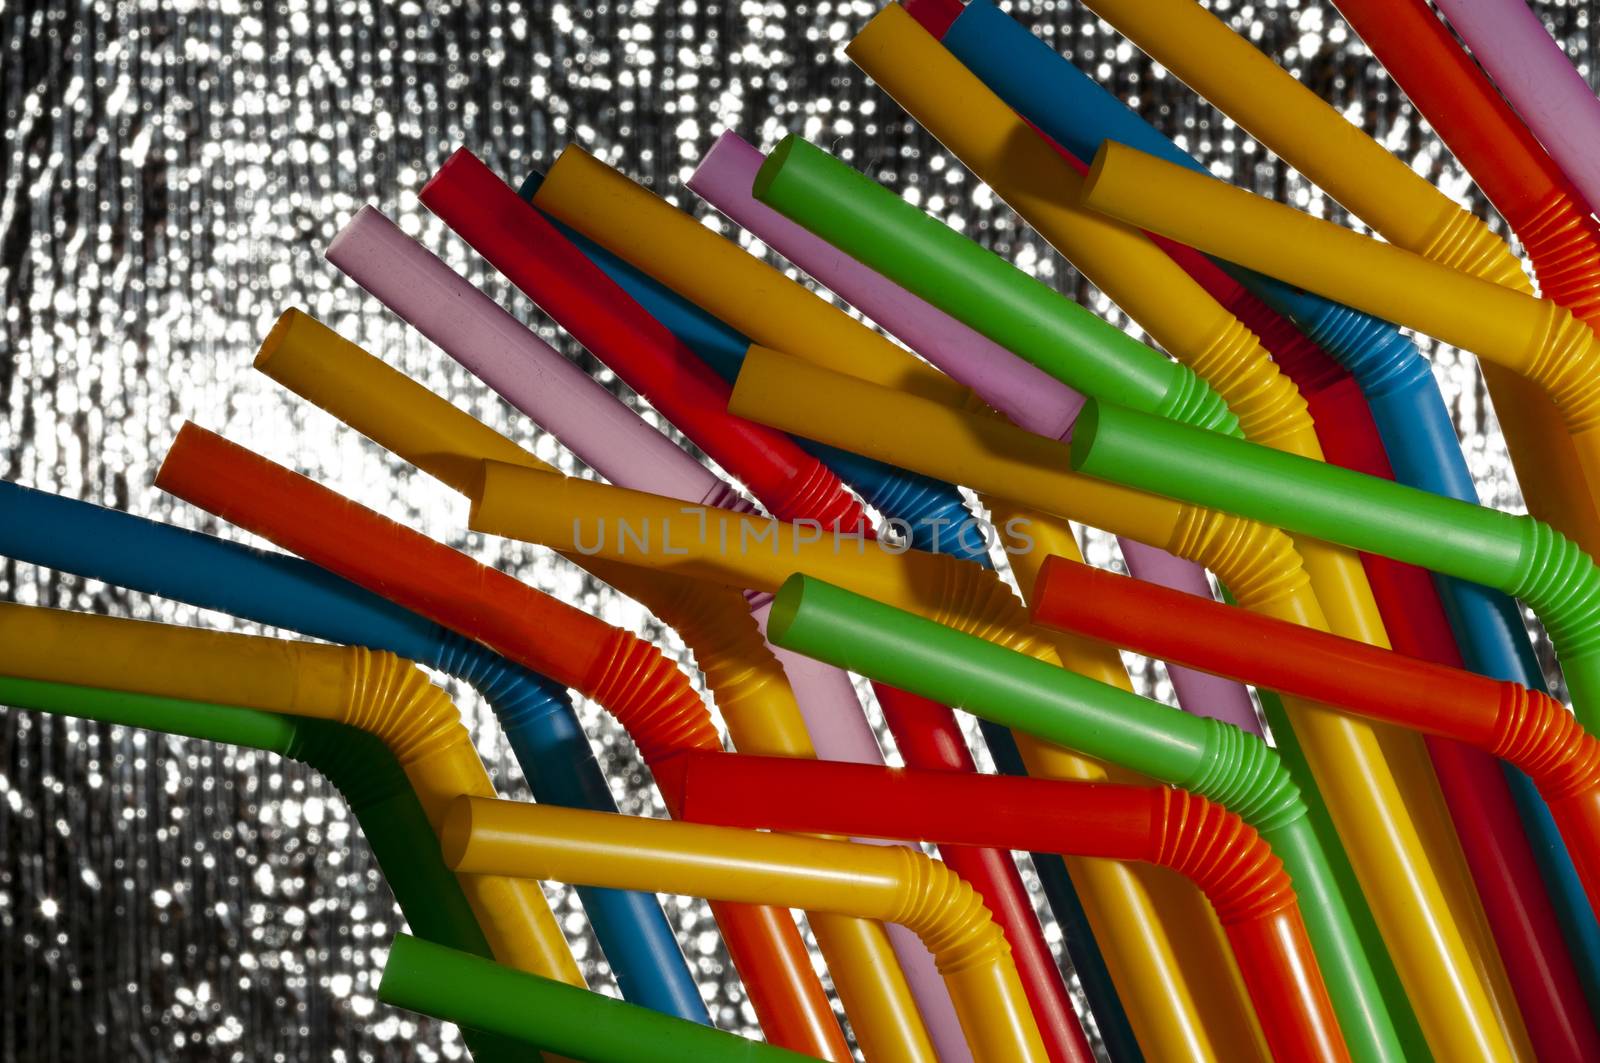 Colorful cocktail straws at the beach bar ready to use